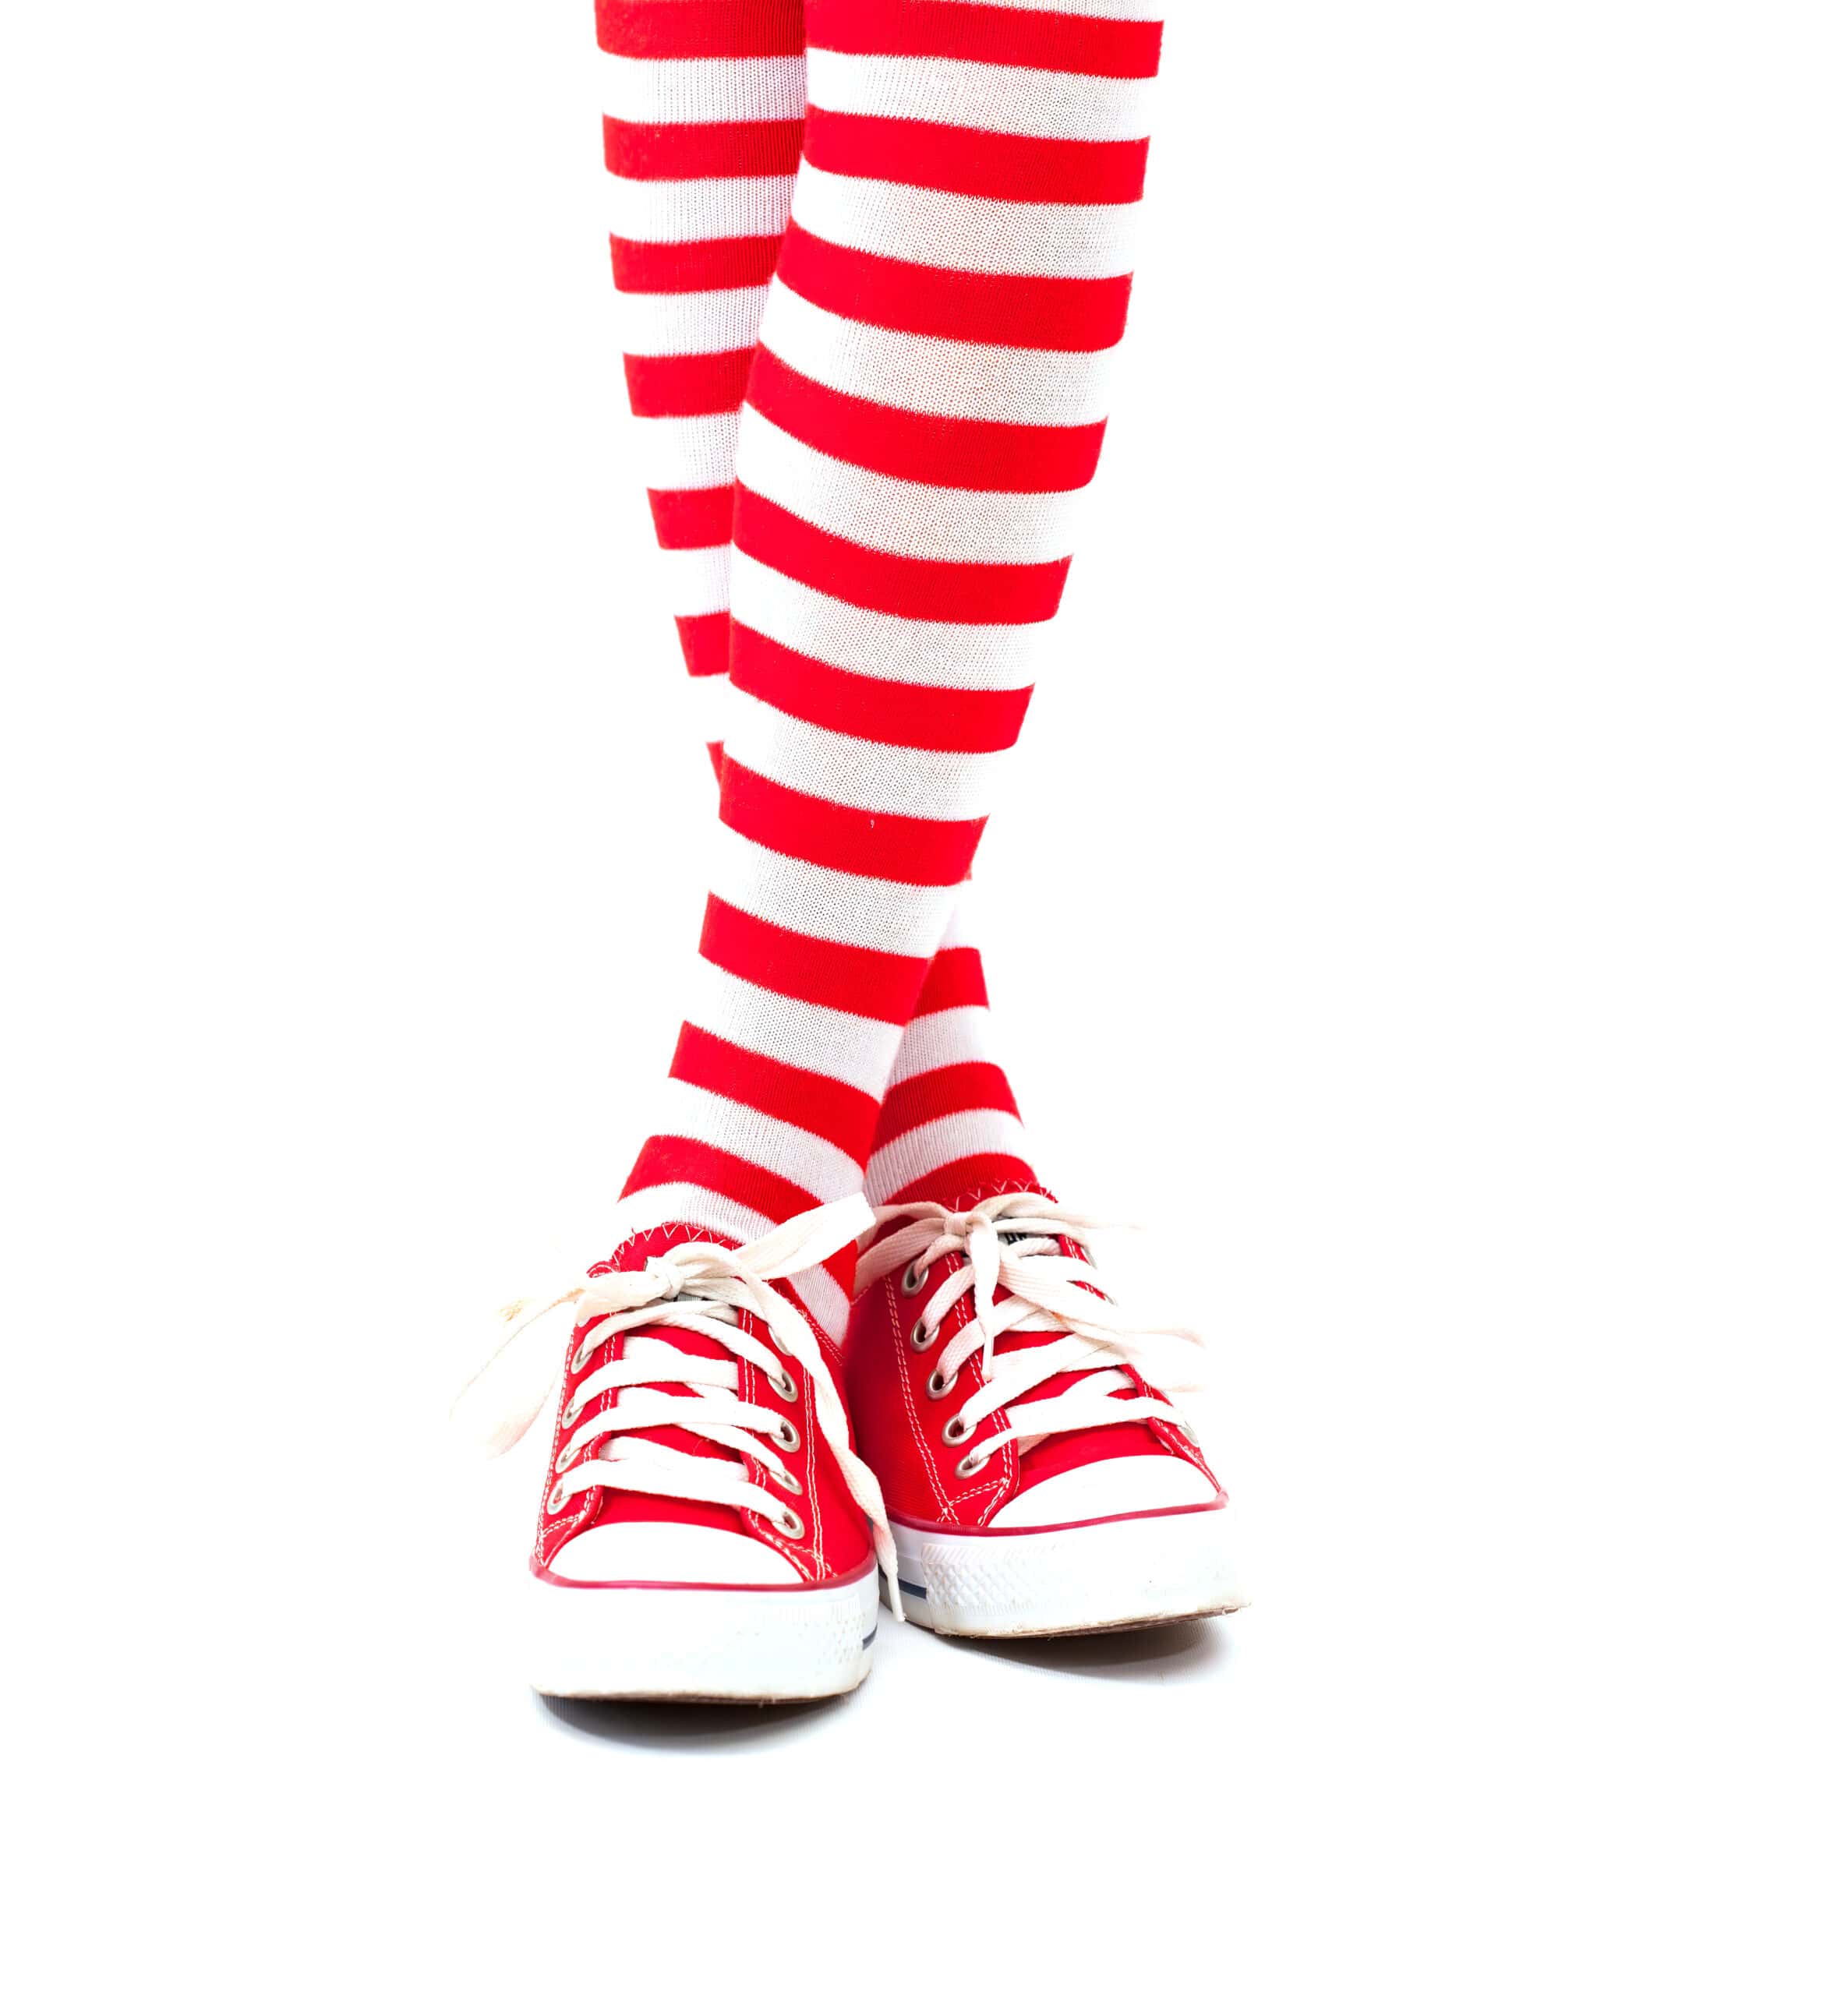 Red and white striped socked legs